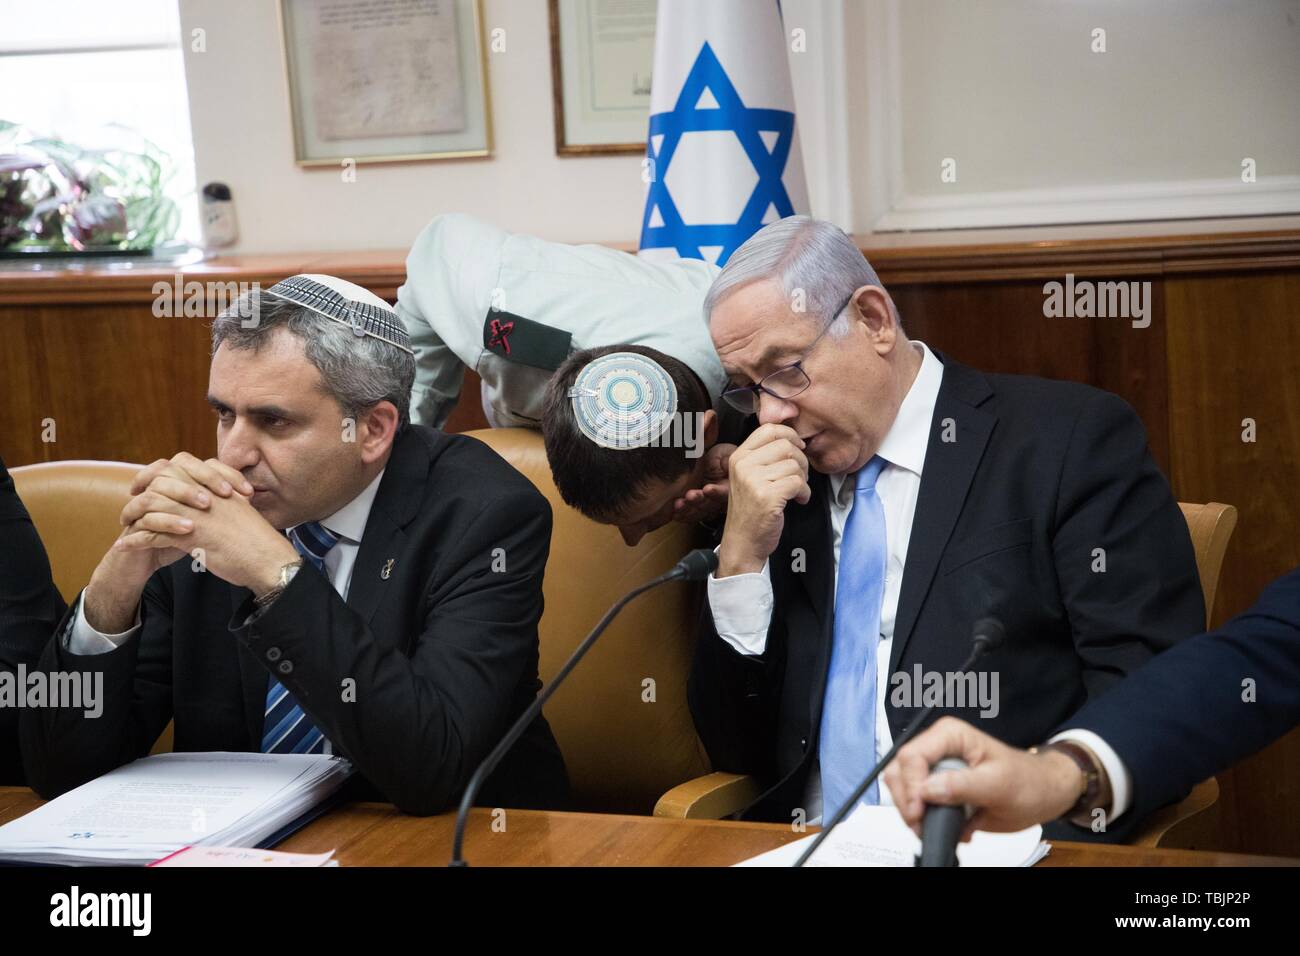 Jerusalem. 2nd June, 2019. Israeli Prime Minister Benjamin Netanyahu (R) attends the weekly cabinet meeting in Jerusalem, June 2, 2019. The Israeli parliament, known as the Knesset, dissolved itself last Wednesday and scheduled another general election for mid-September of this year. The development came after Israeli Prime Minister Benjamin Netanyahu failed to form a coalition government. Credit: JINI/Yonatan Sindel/Xinhua/Alamy Live News Stock Photo